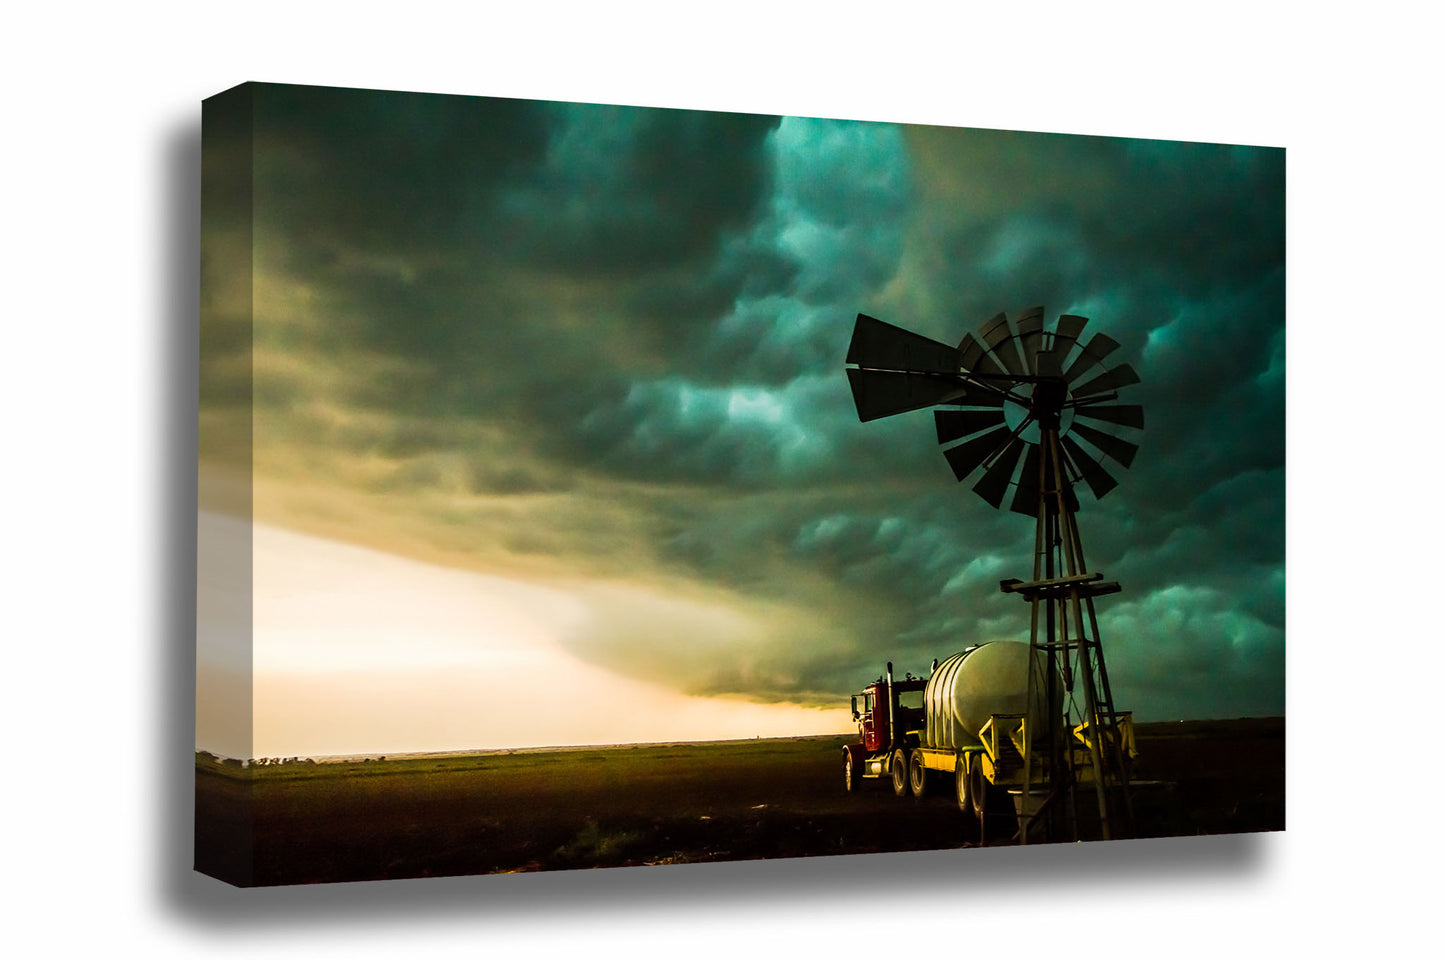 Country canvas wall art of a thunderstorm advancing over an old windmill and semi-truck on a stormy summer day in Oklahoma by Sean Ramsey of Southern Plains Photography.